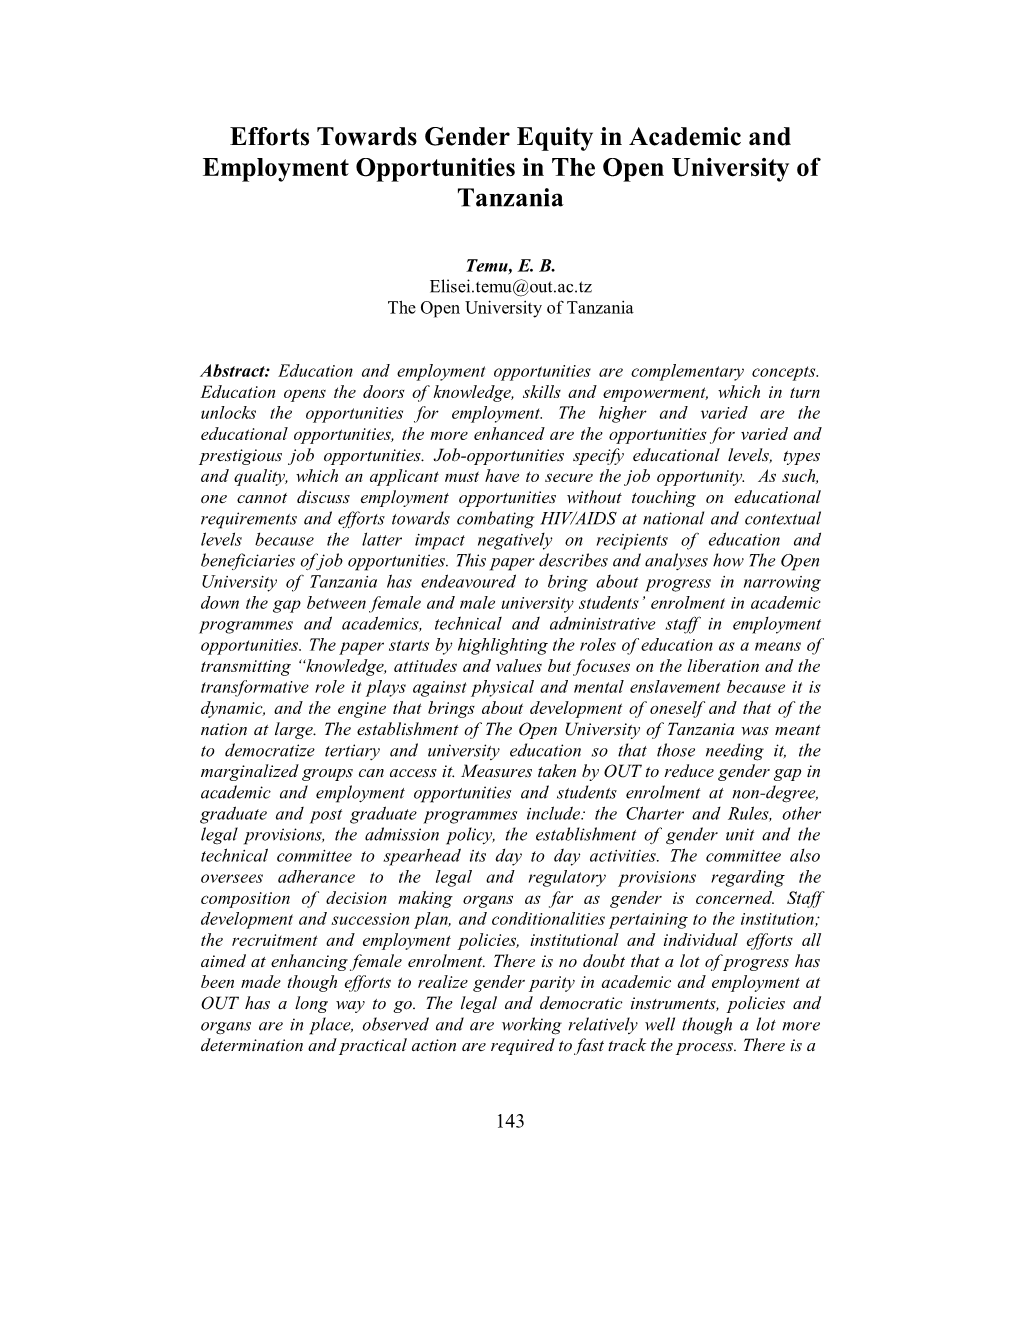 Efforts Towards Gender Equity in Academic and Employment Opportunities in the Open University of Tanzania